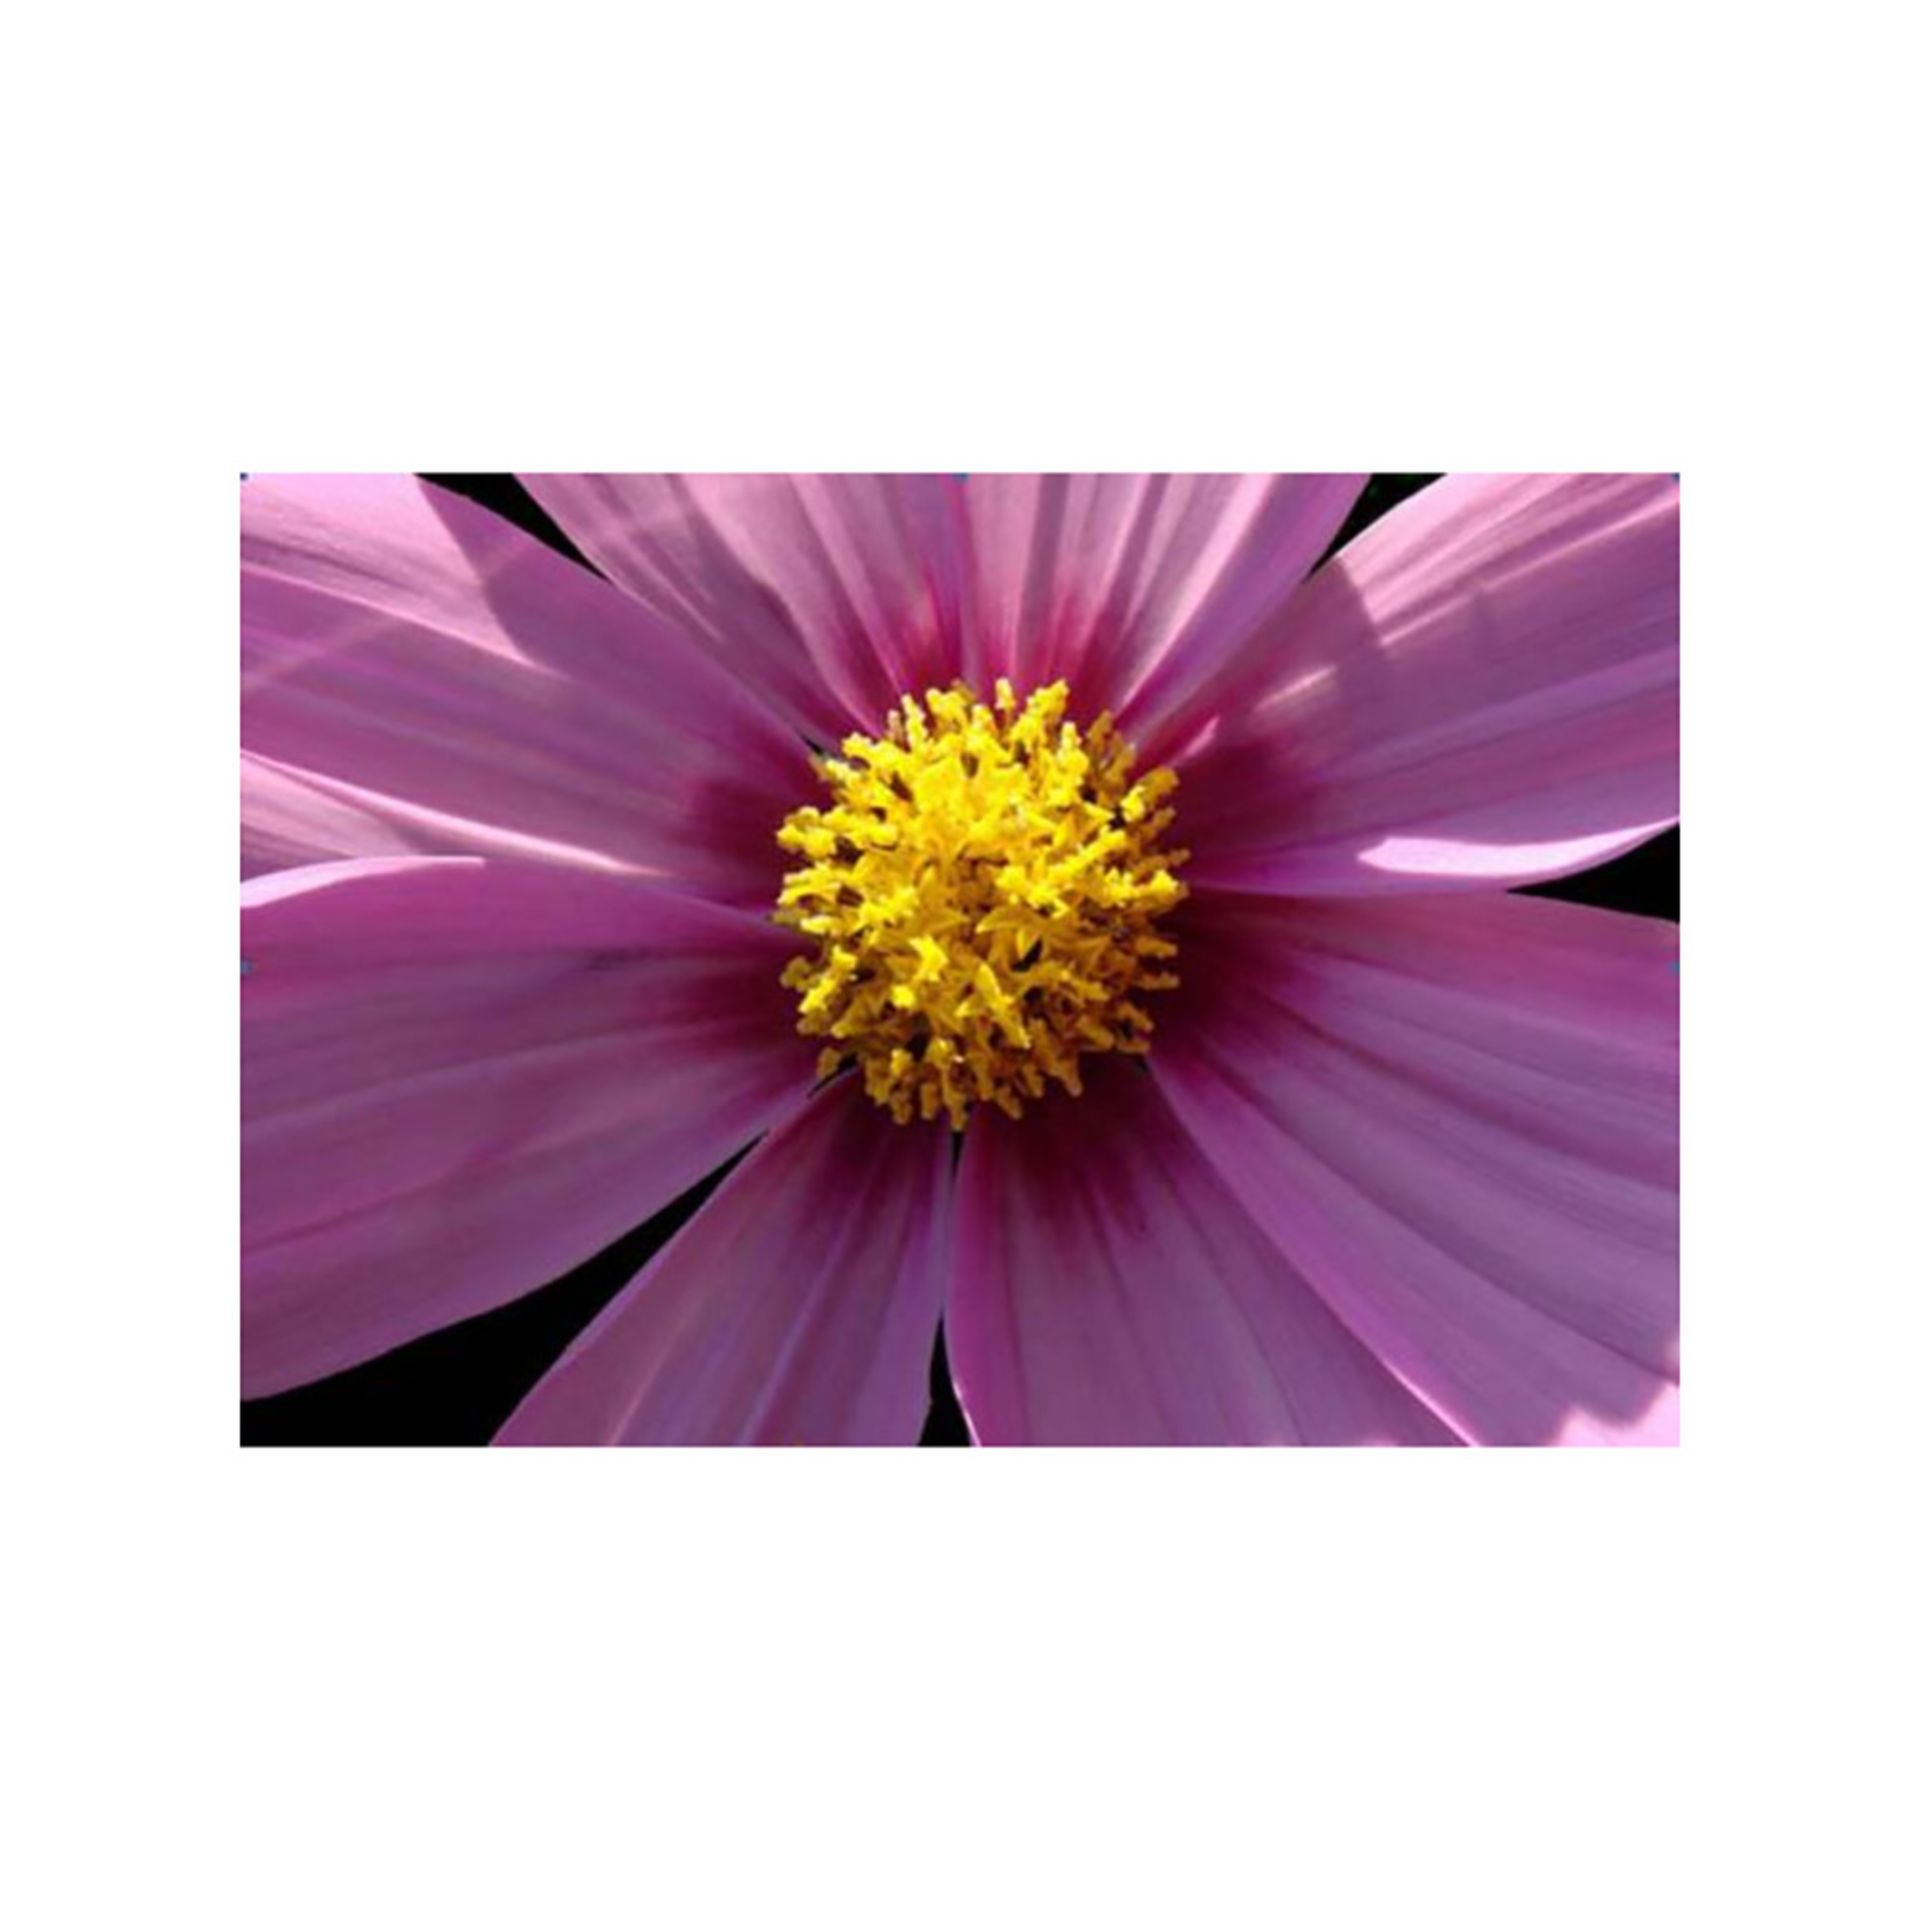 V Brand New 50 x 40 cm Cosmos Close Up - Print Of Flower On Canvas ISP £9.99